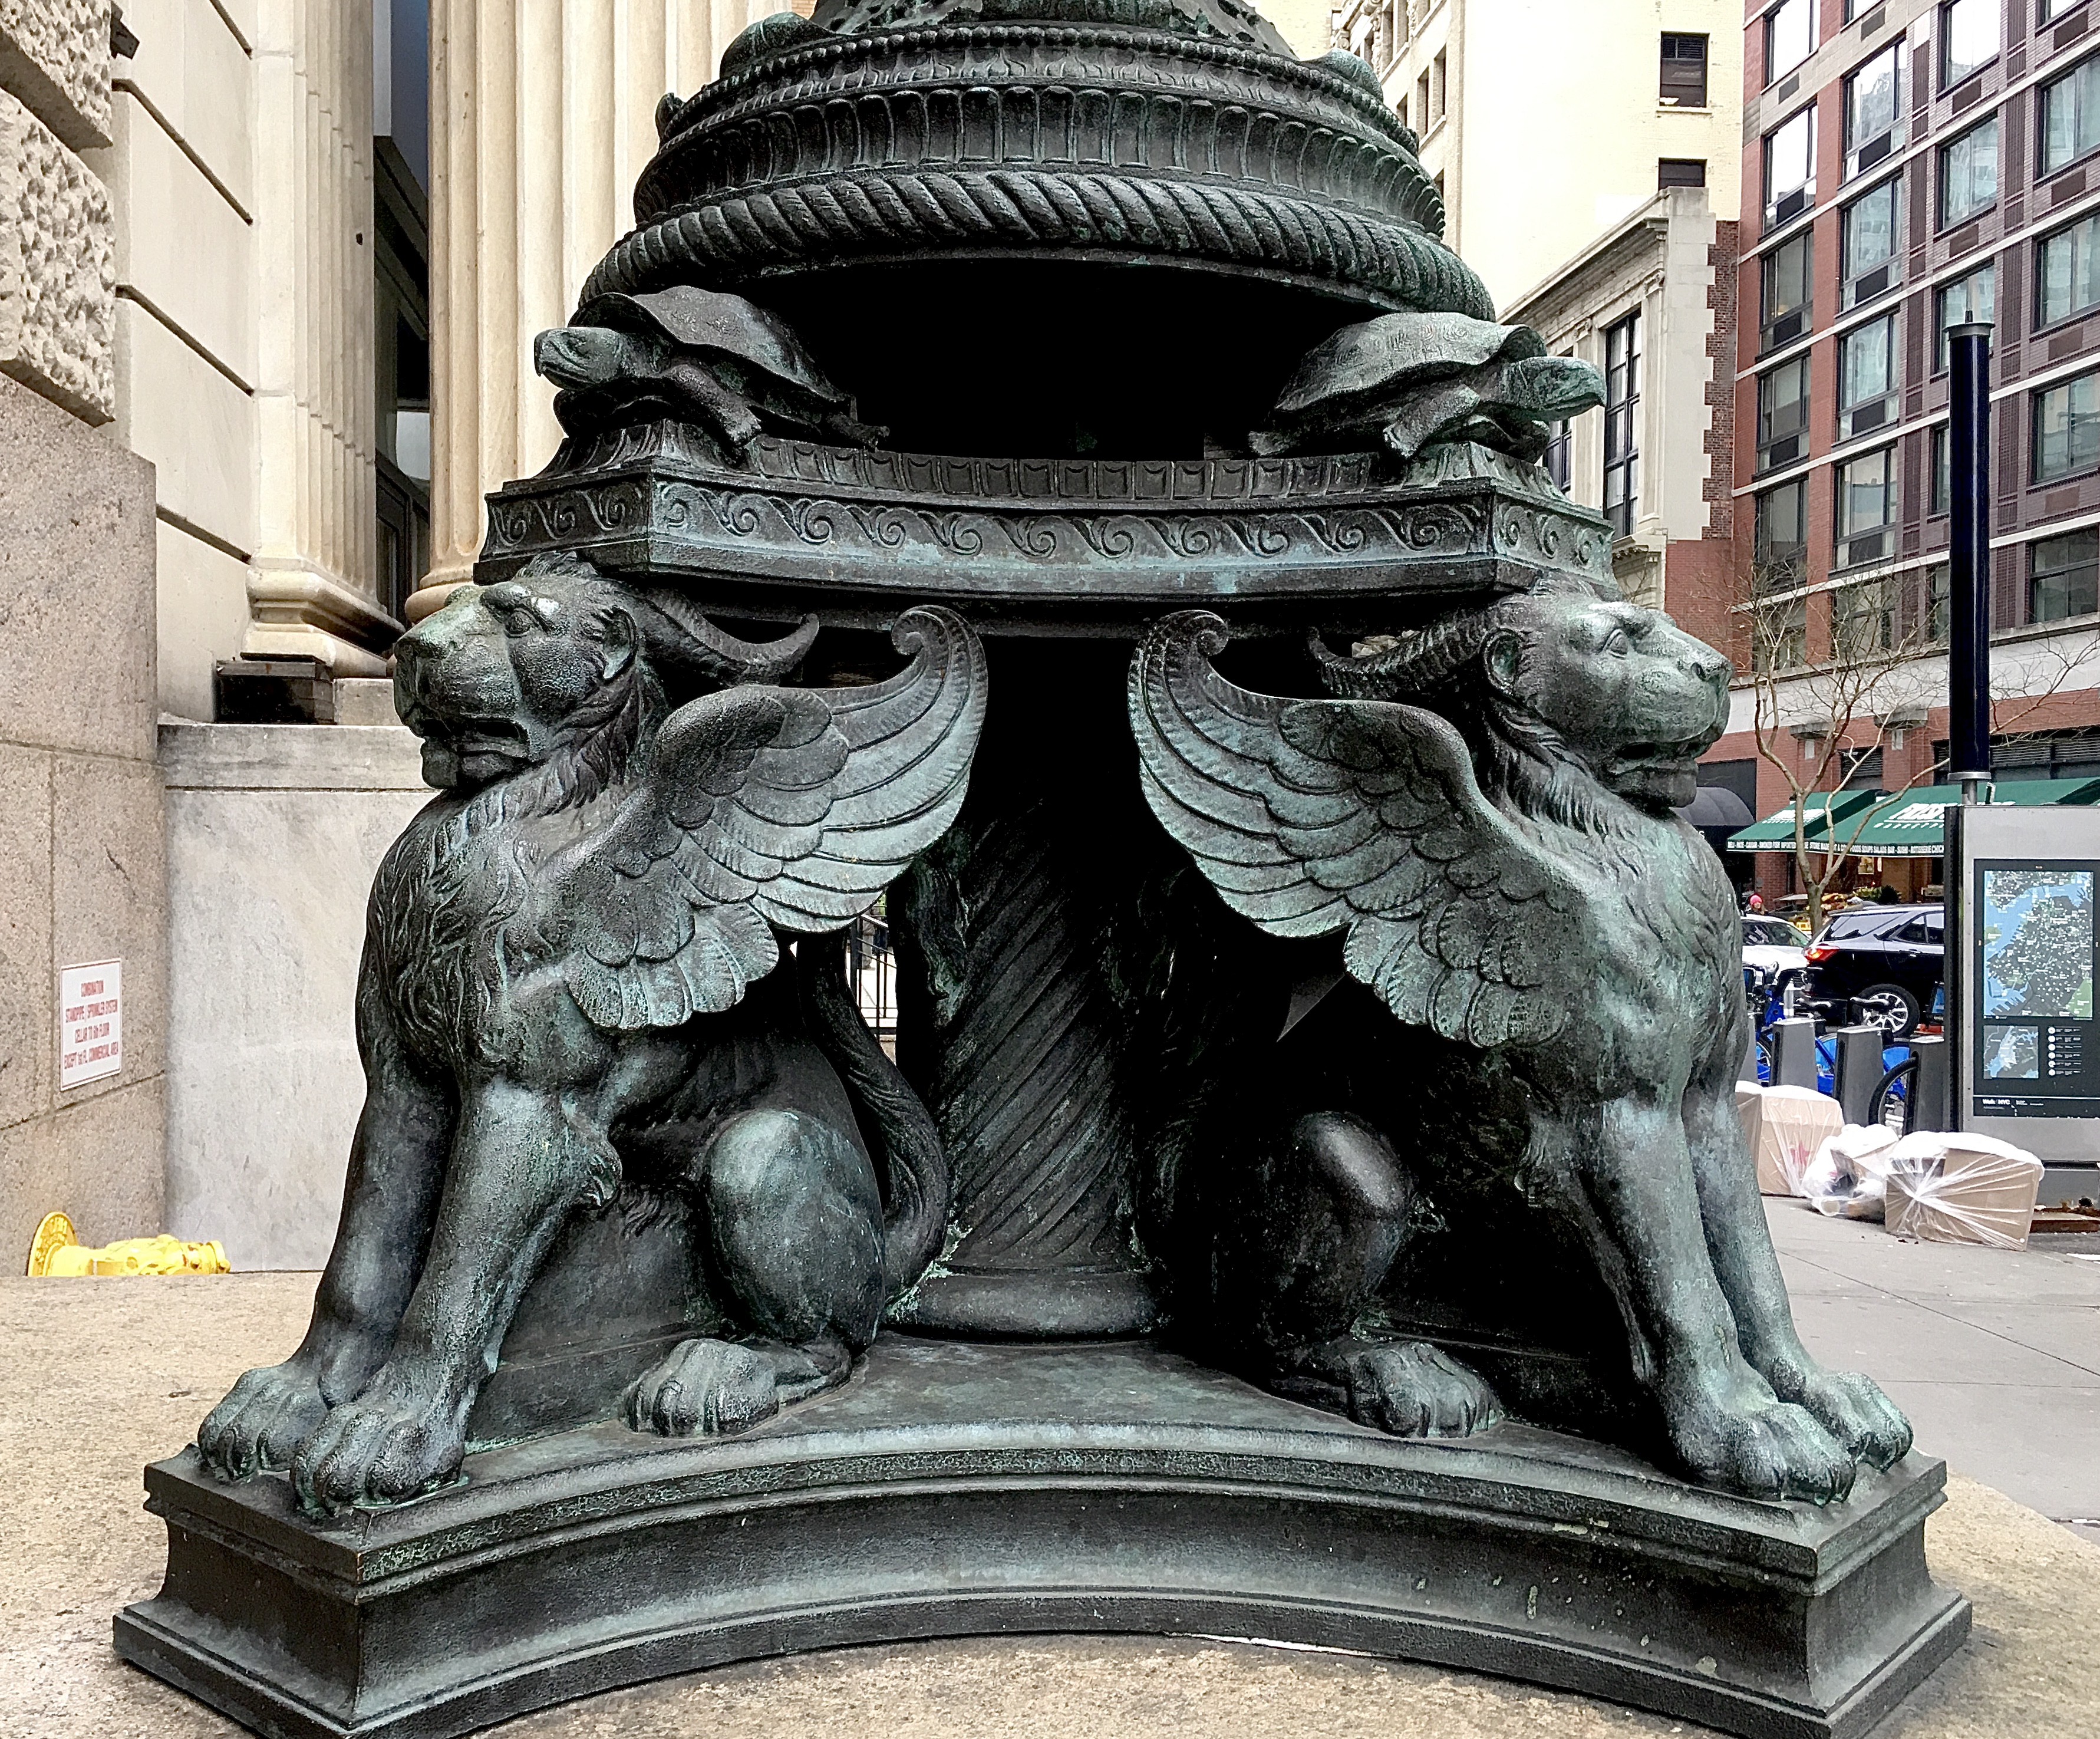 Hello Kitties: Winged lions form the base of a lamppost at Montague Street’s Chase Bank branch. Photo: Lore Croghan/Brooklyn Eagle